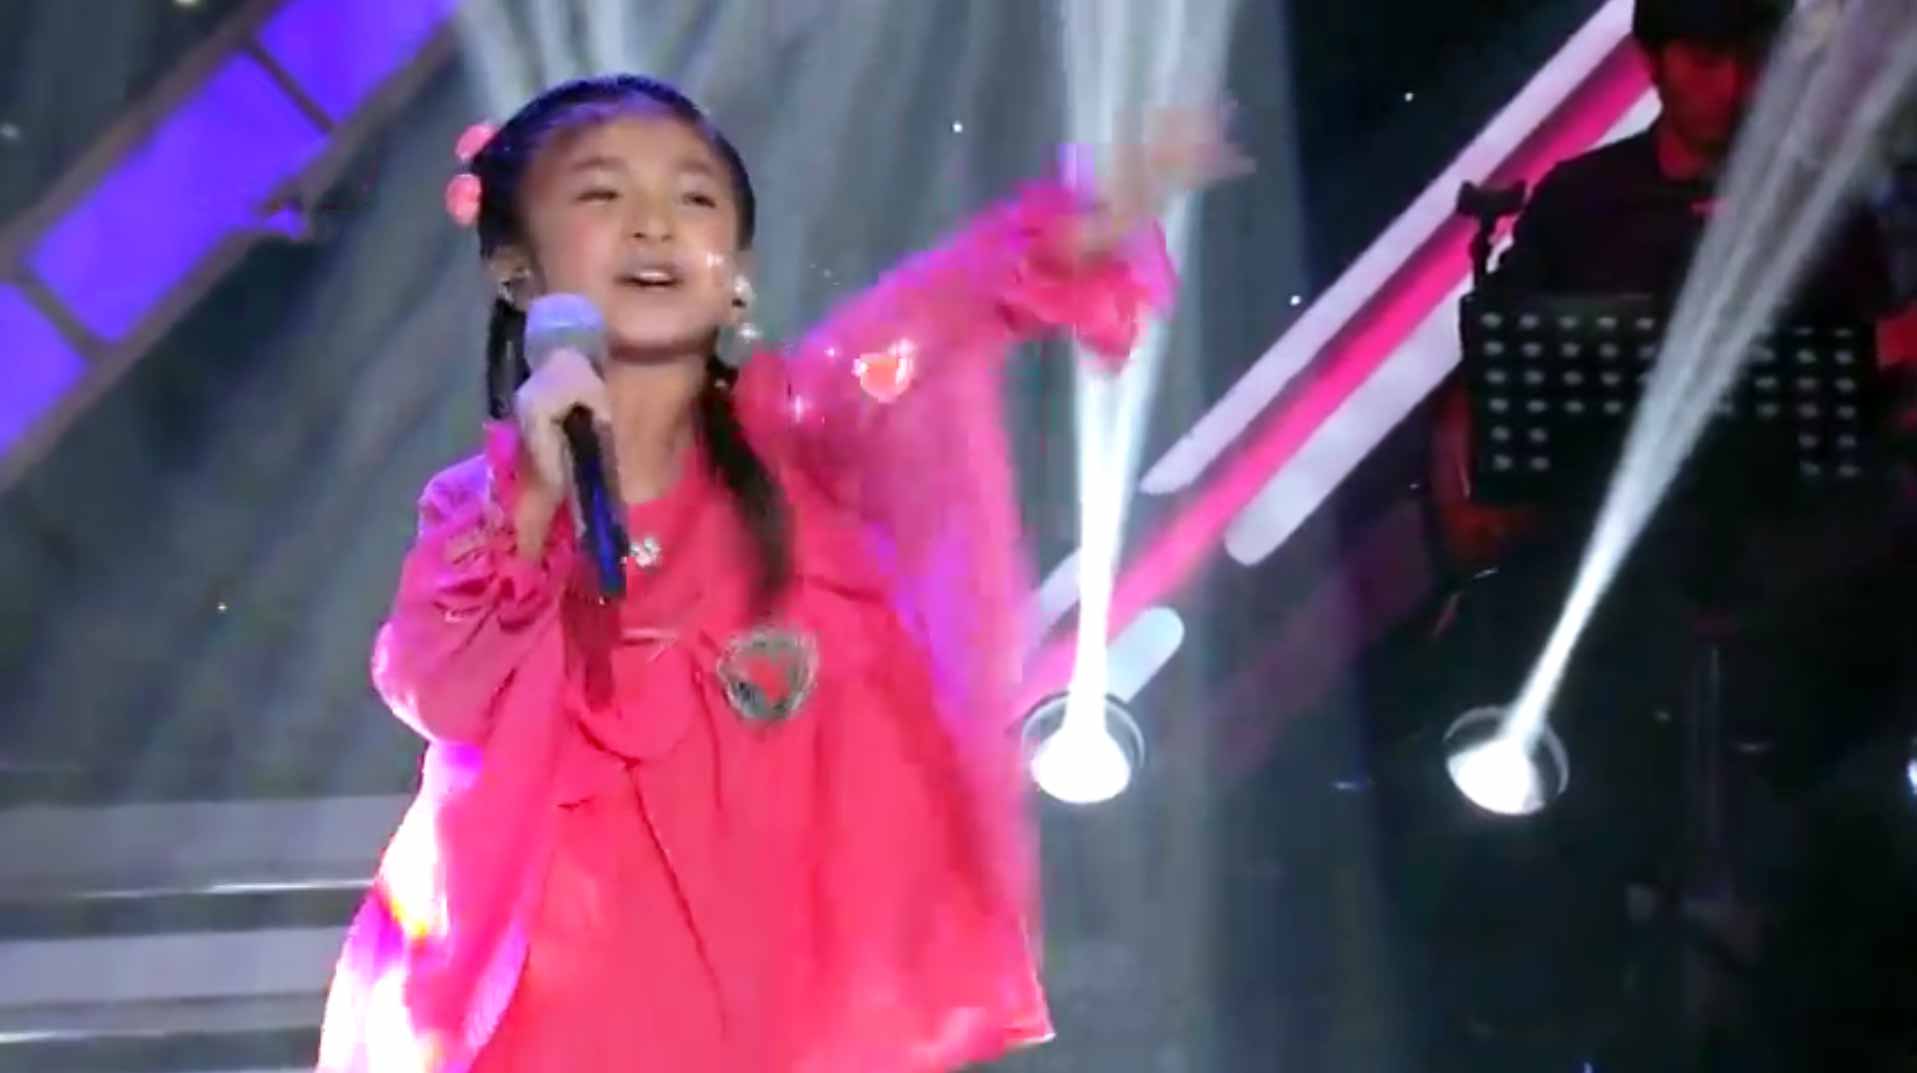 5-year-old Celine Tam - 'You Raise Me Up'